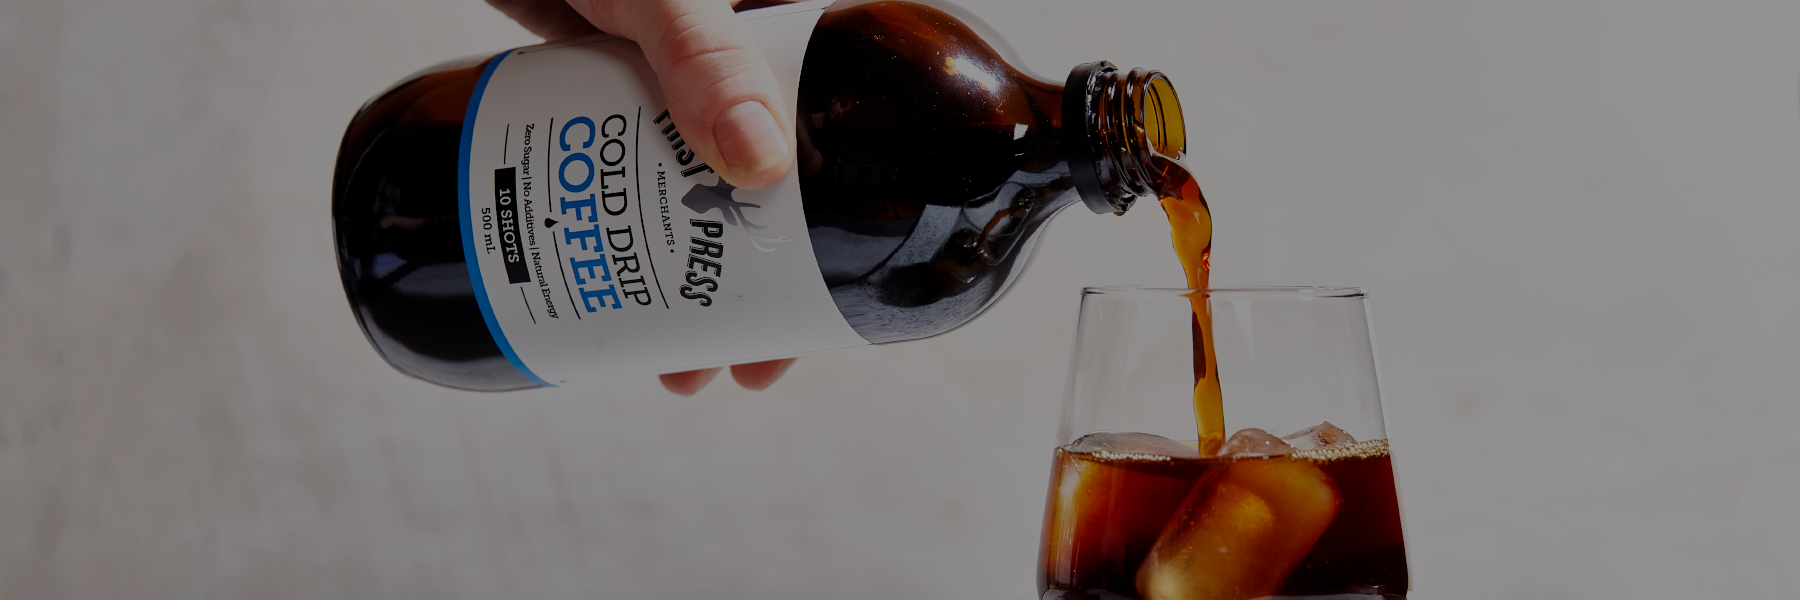 First Press Cold Drip Coffee | Melbourne Made